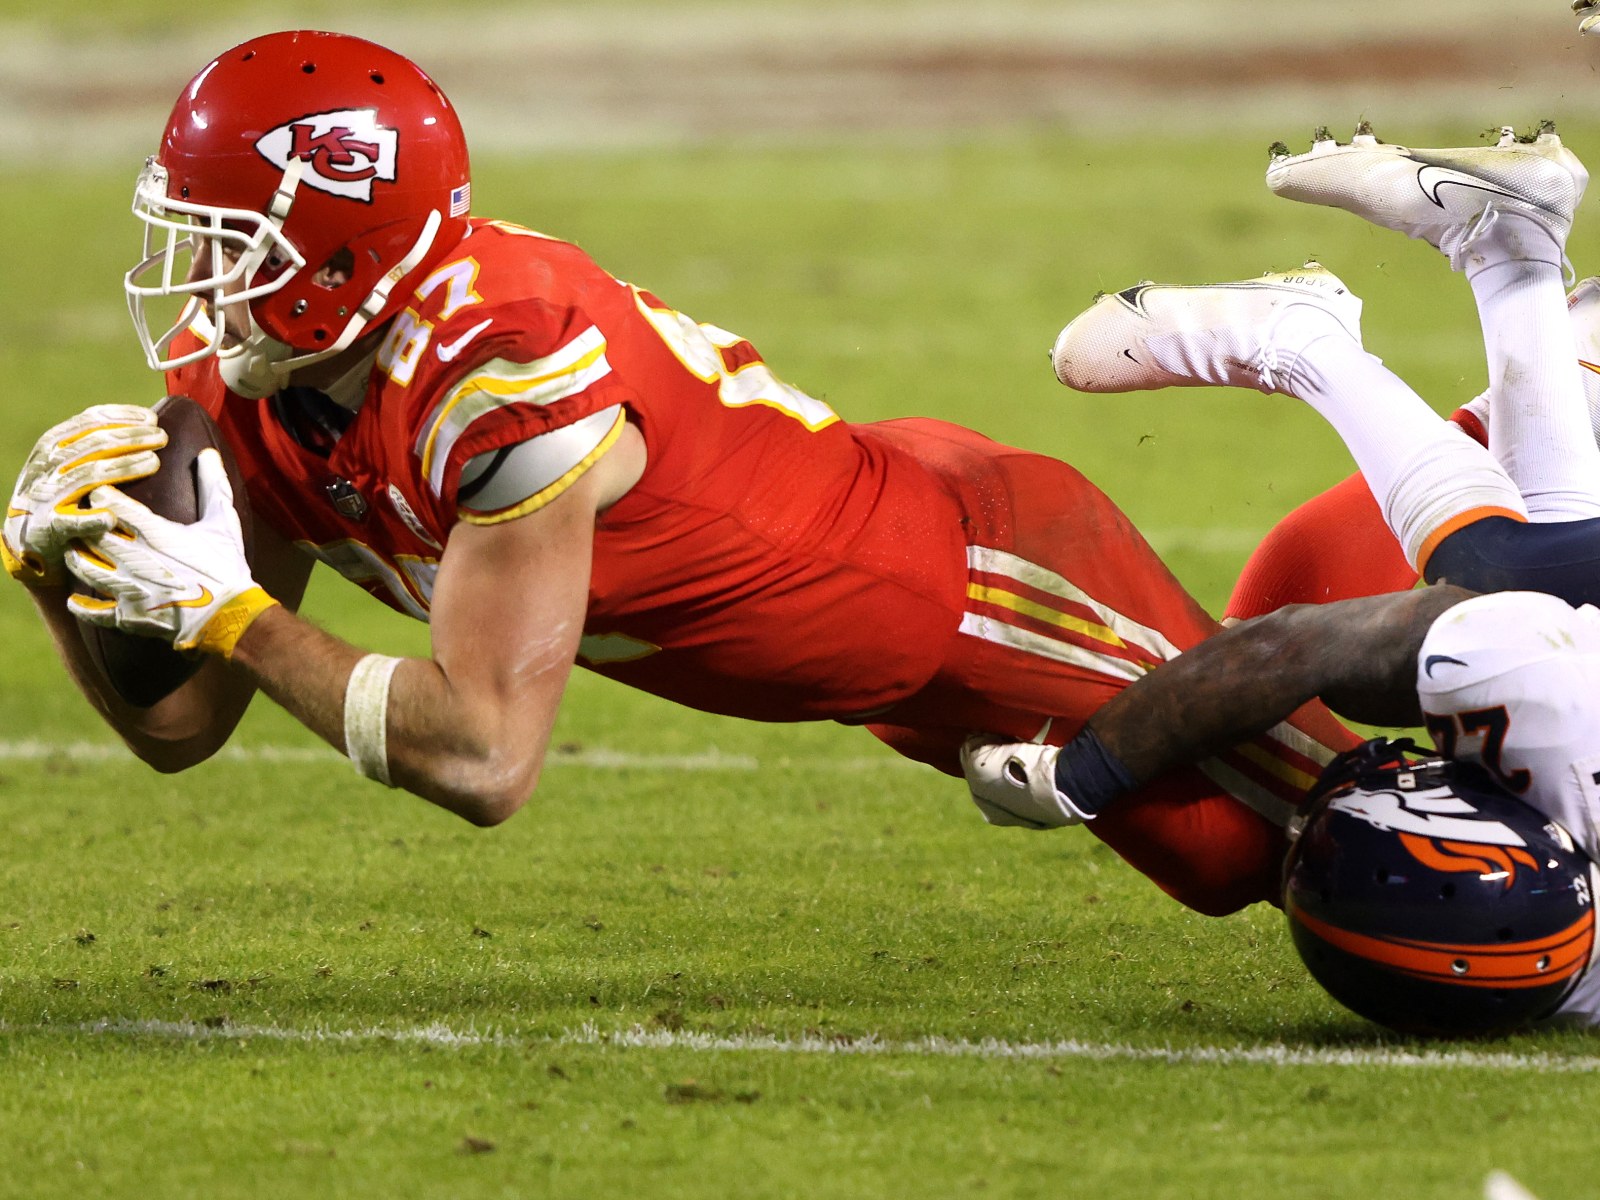 Sunday Night Football on NBC - Travis Kelce made his fantasy managers happy  in Week 1. #ChiefsKingdom